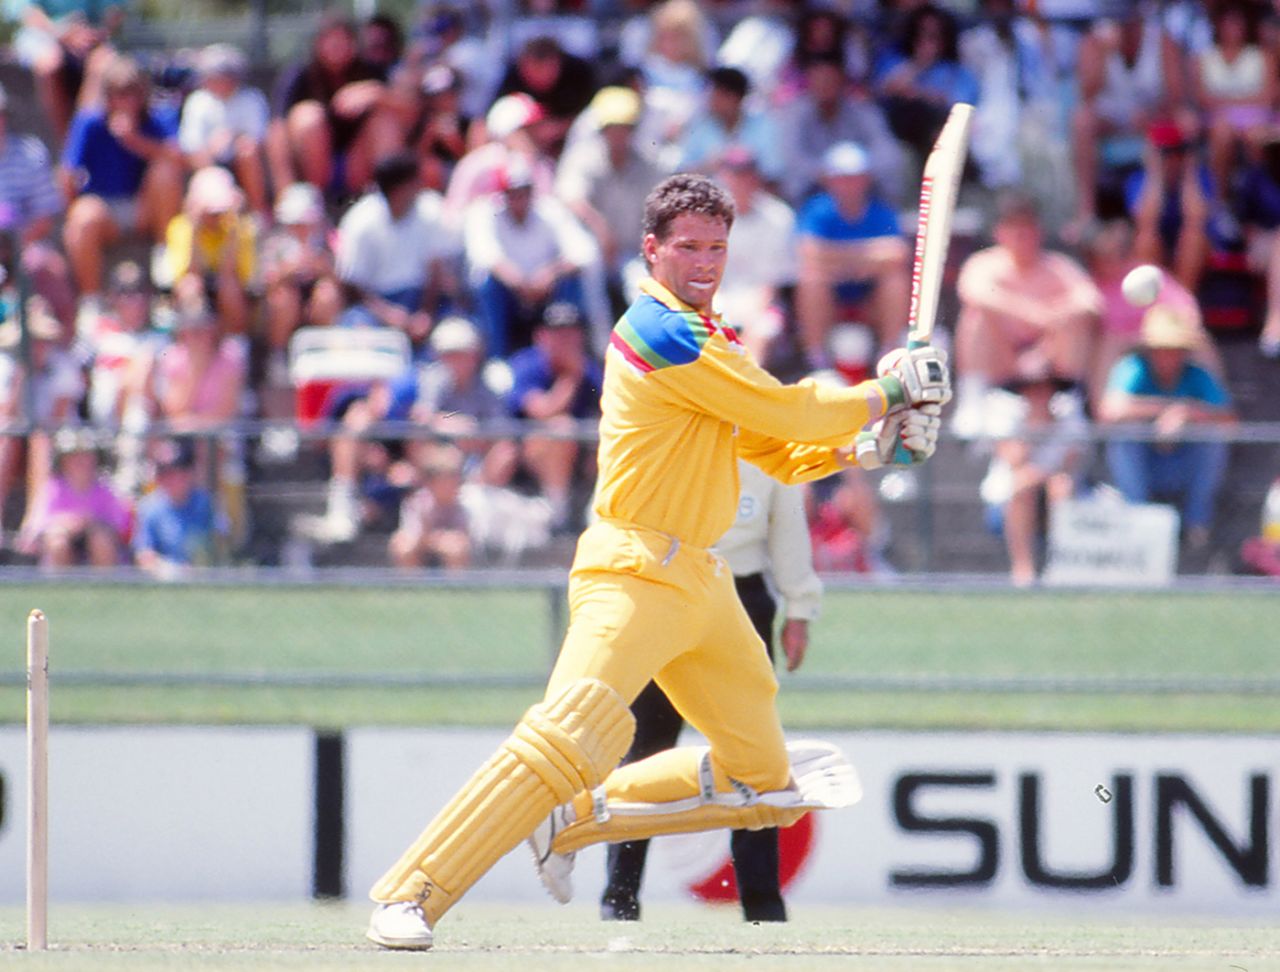 Dean Jones on his way to making 90 in a one-run win over India in the 1992 World Cup